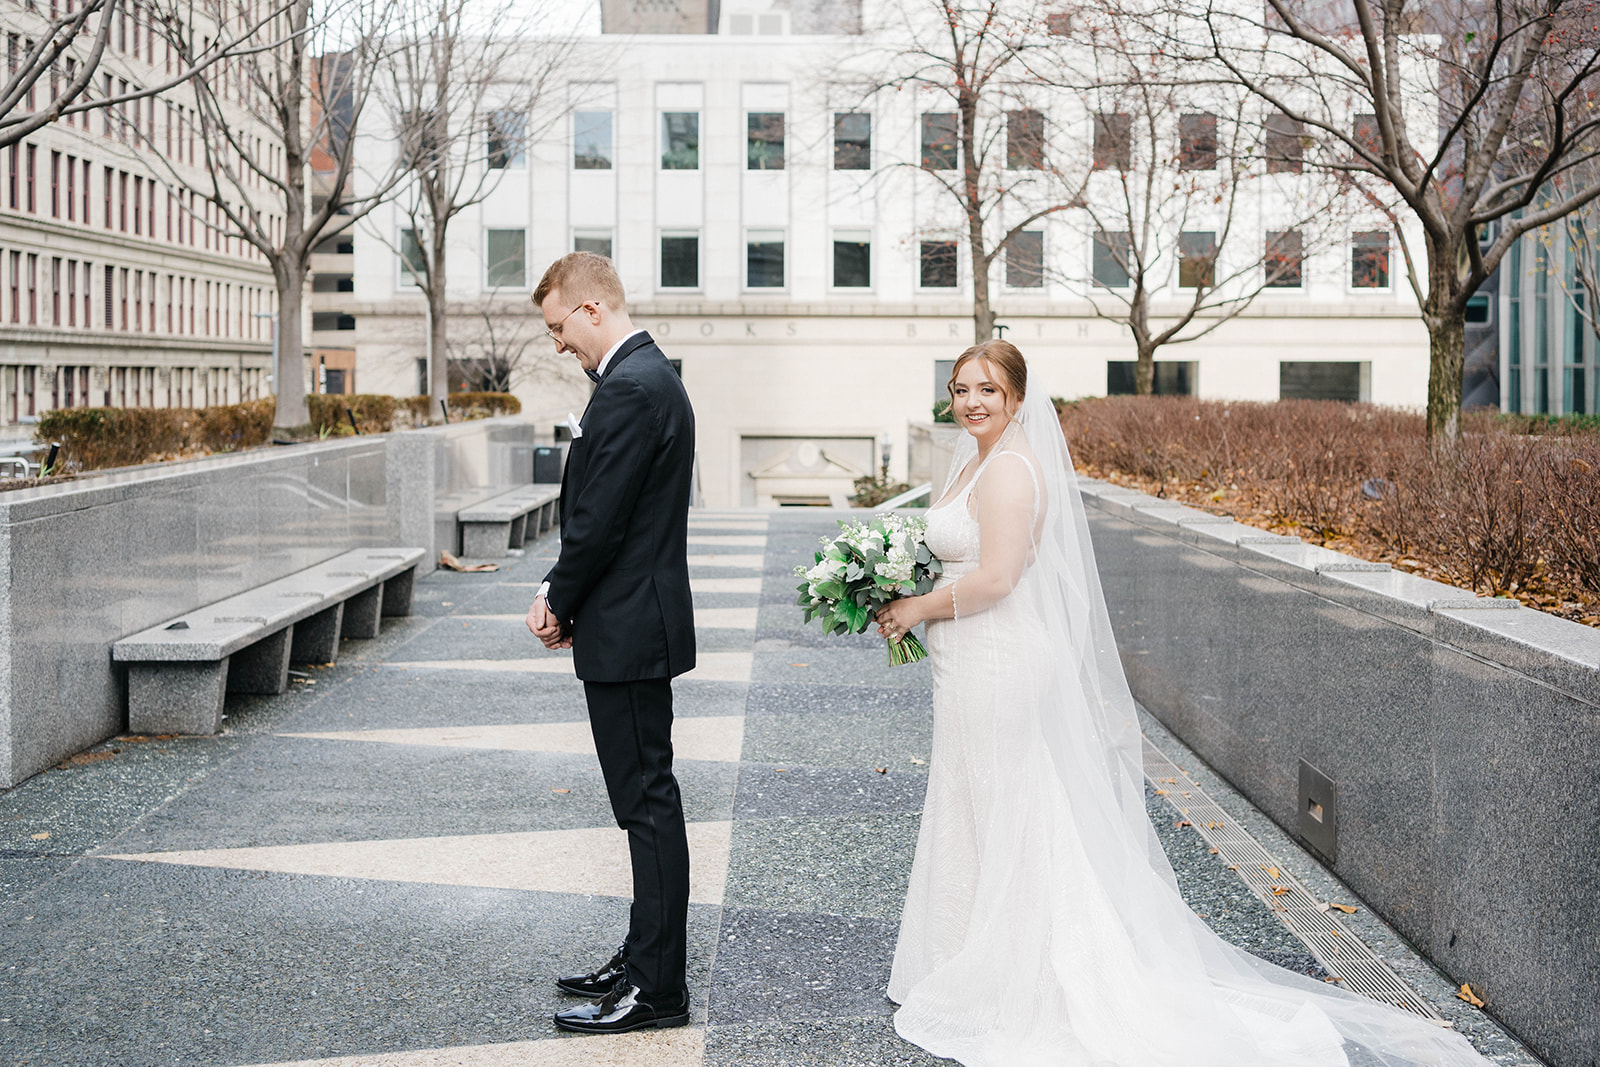 A couple wedding in Embassy Suites Pittsburgh Downtown, captured in authentic, documentary-style photography. 